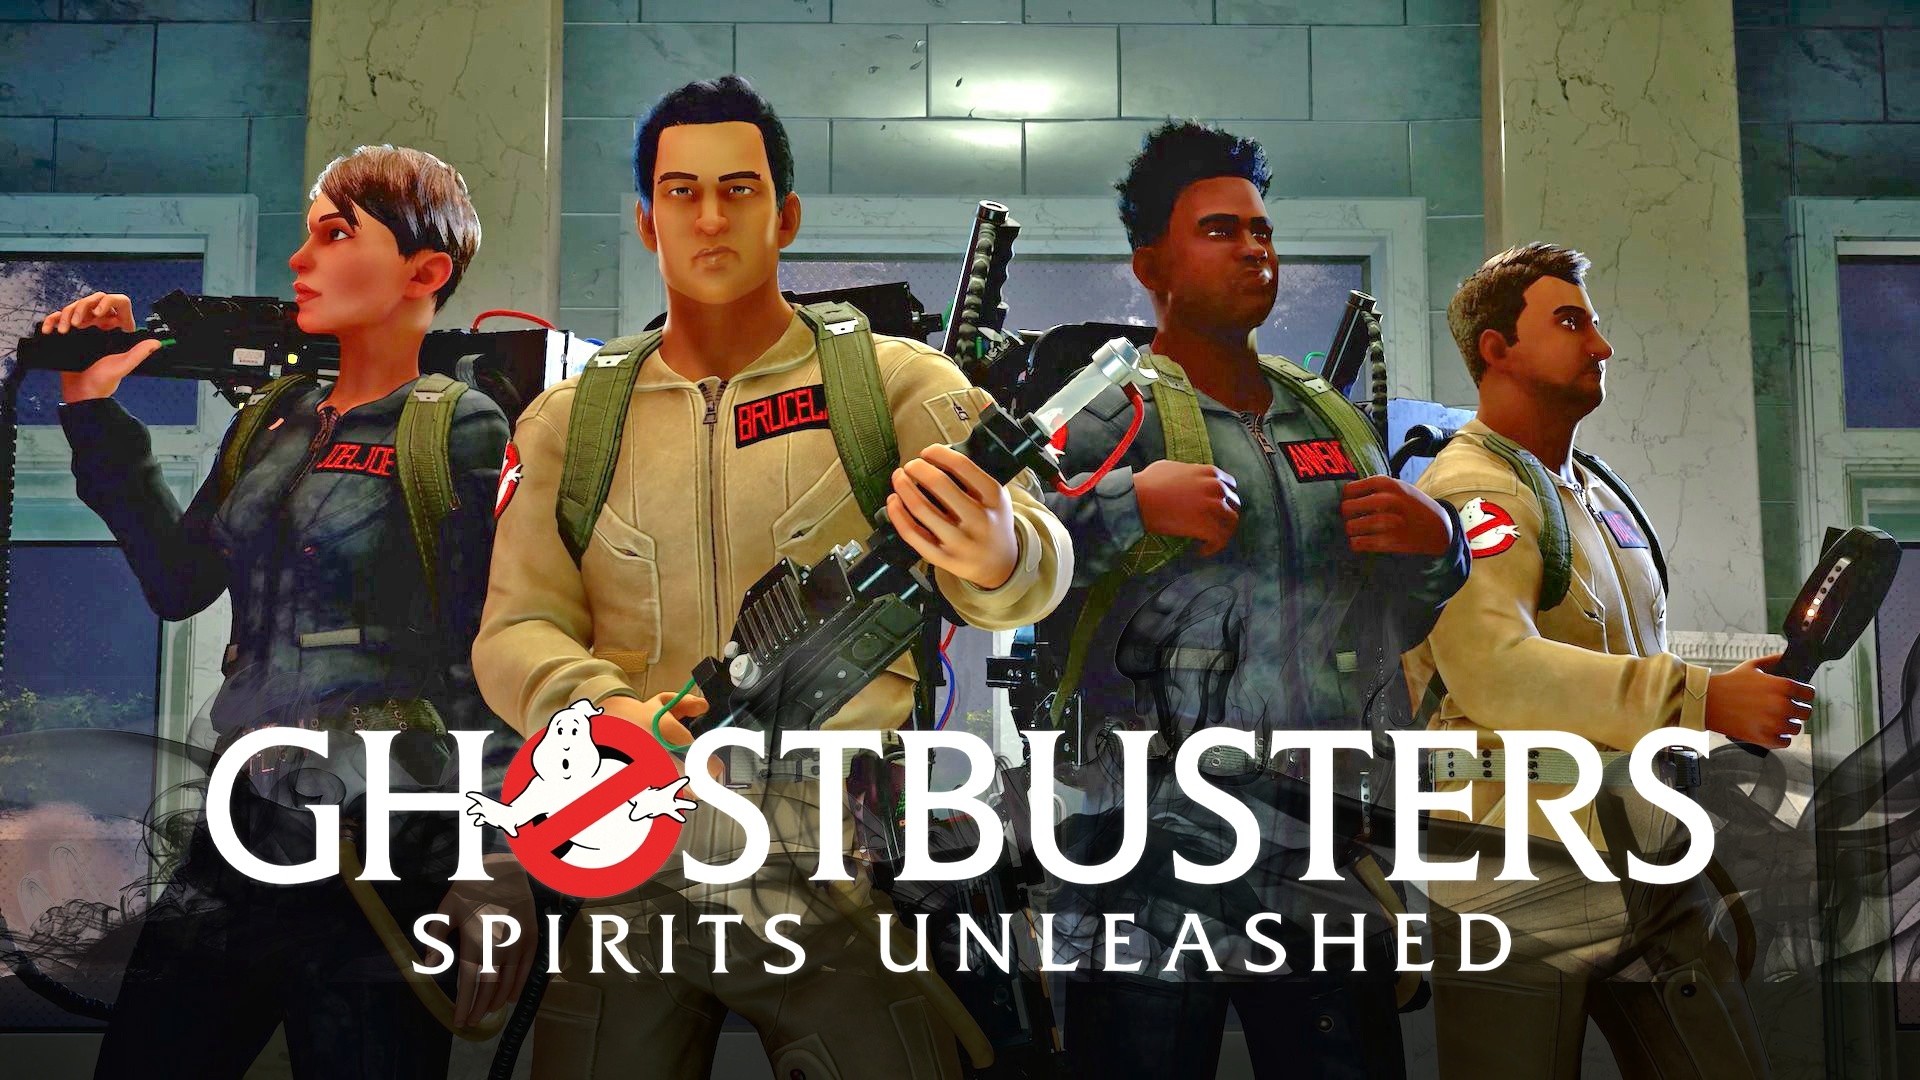 Ghostbusters: Spirits Unleashed, prepares its second free DLc which arrives this week